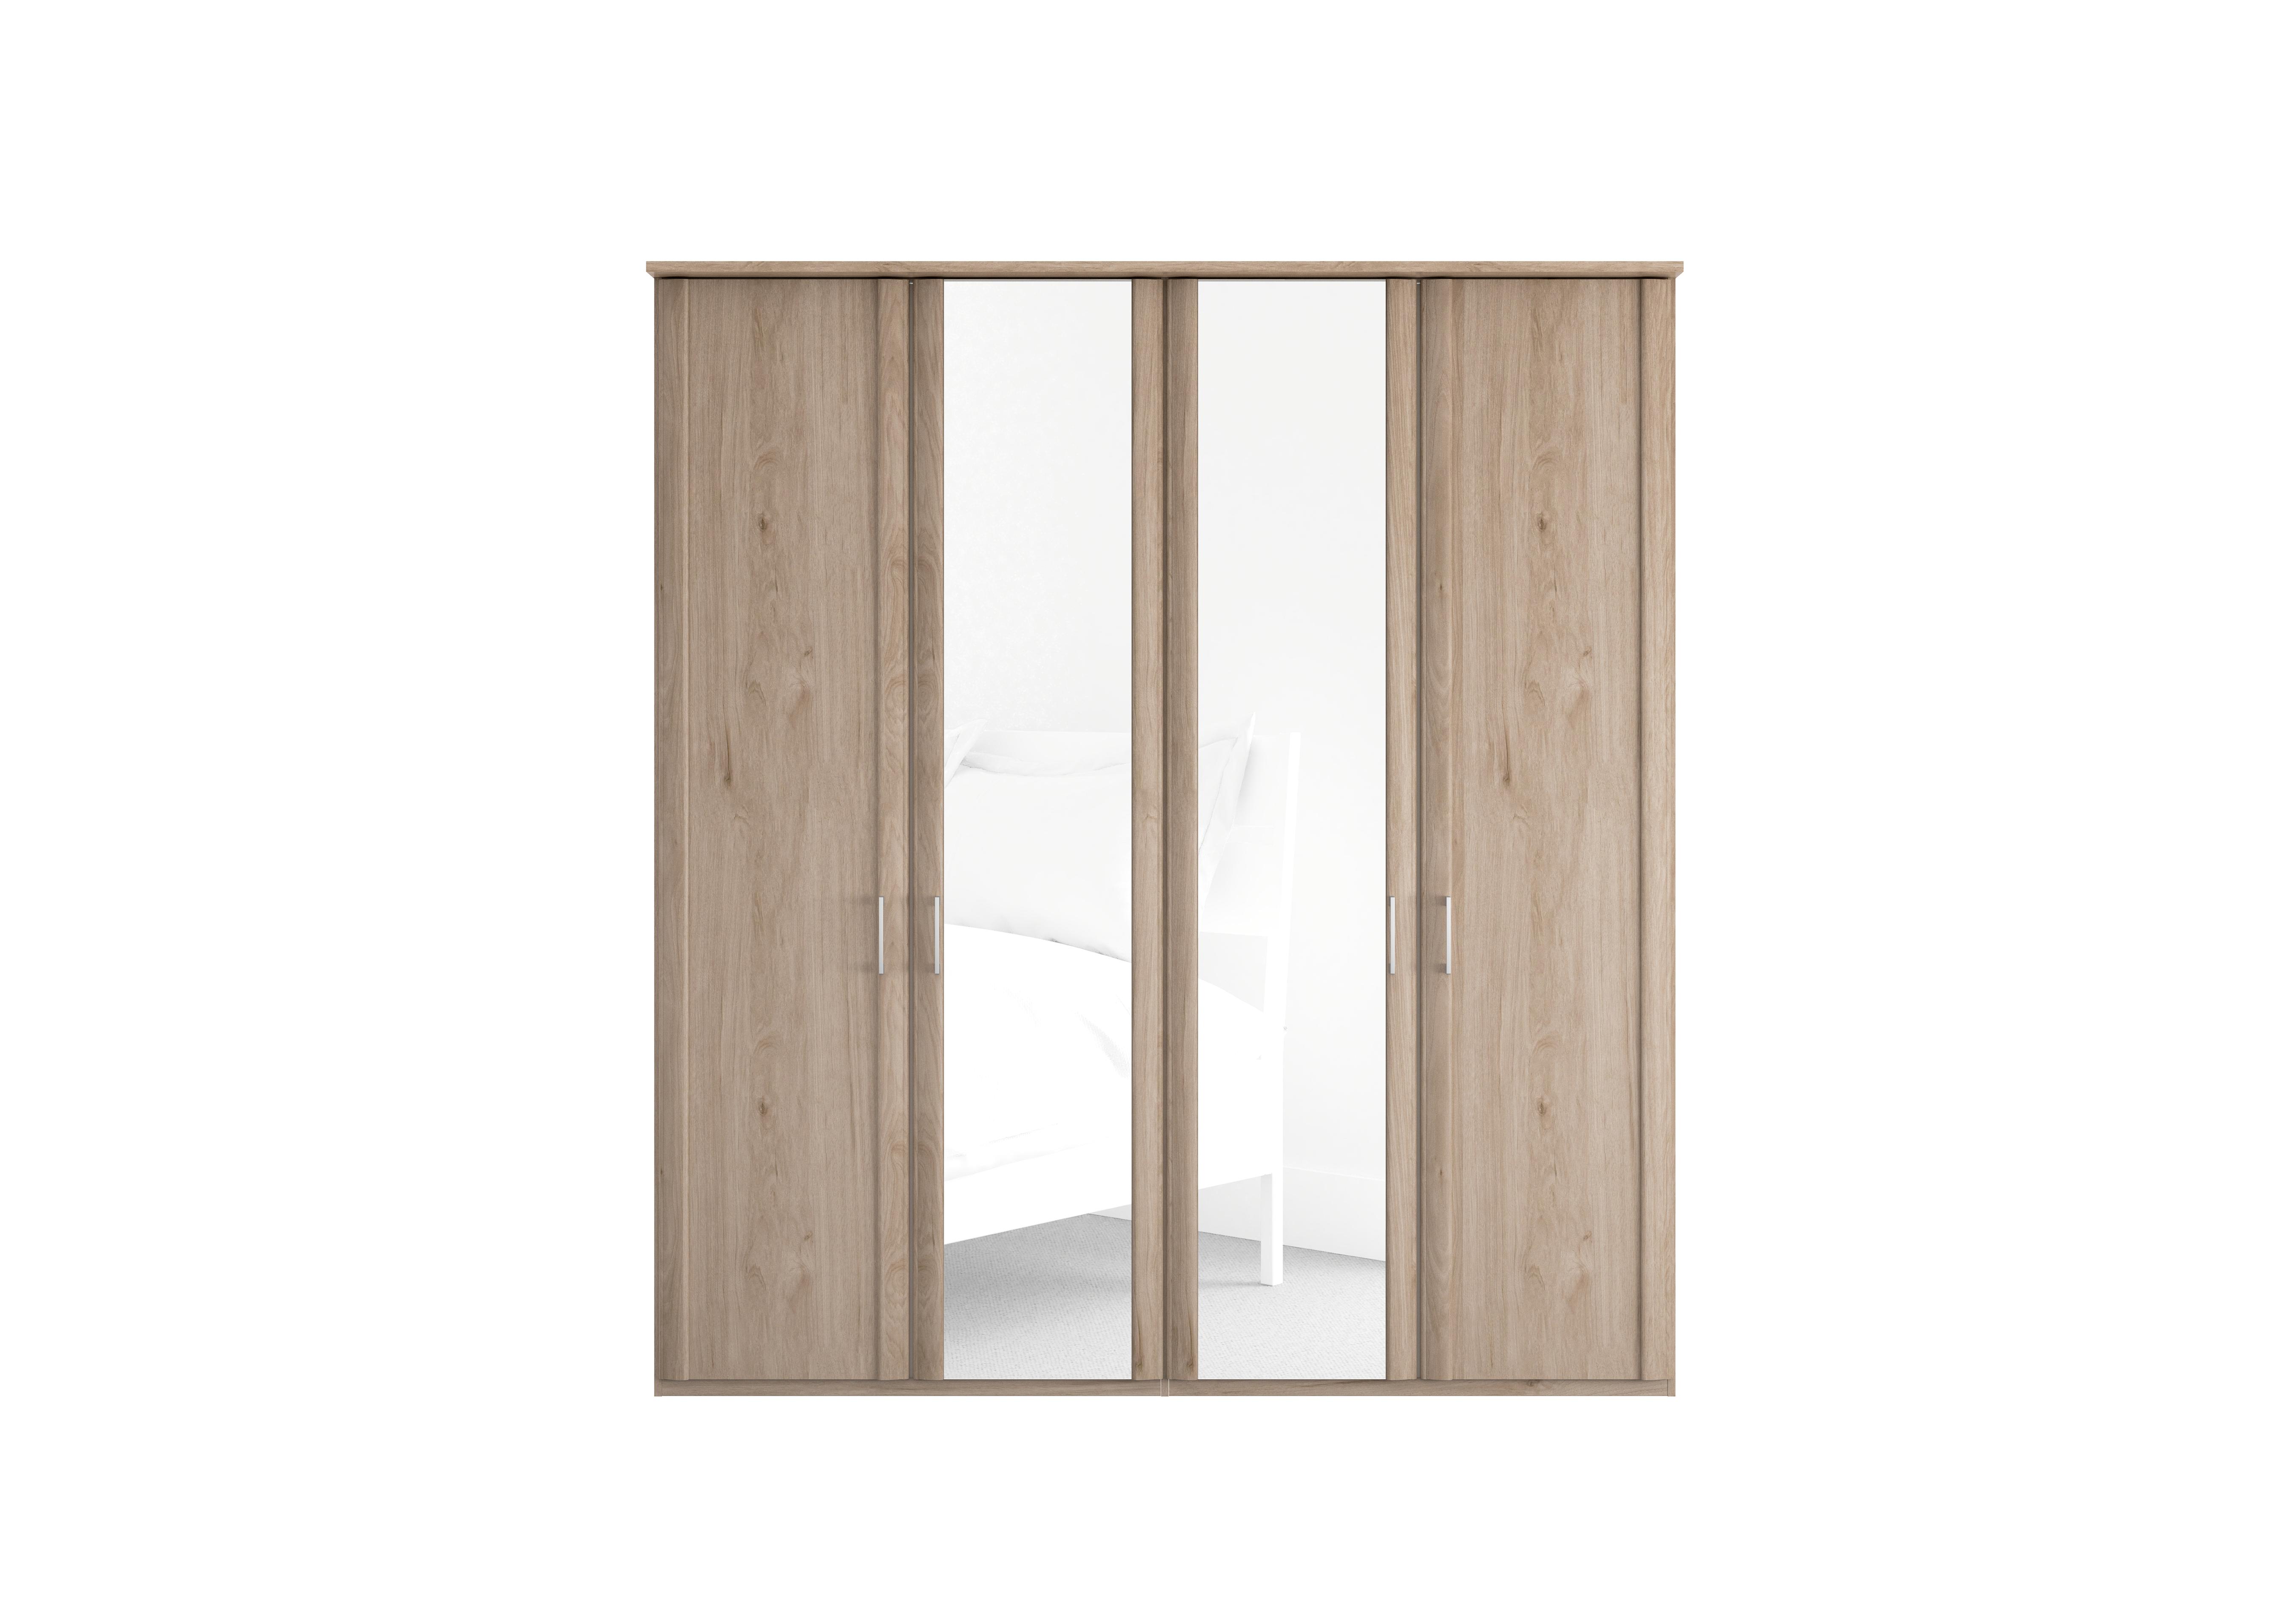 Oxford 4 Door Hinged Wardrobe with Mirrors in Holm Oak on Furniture Village